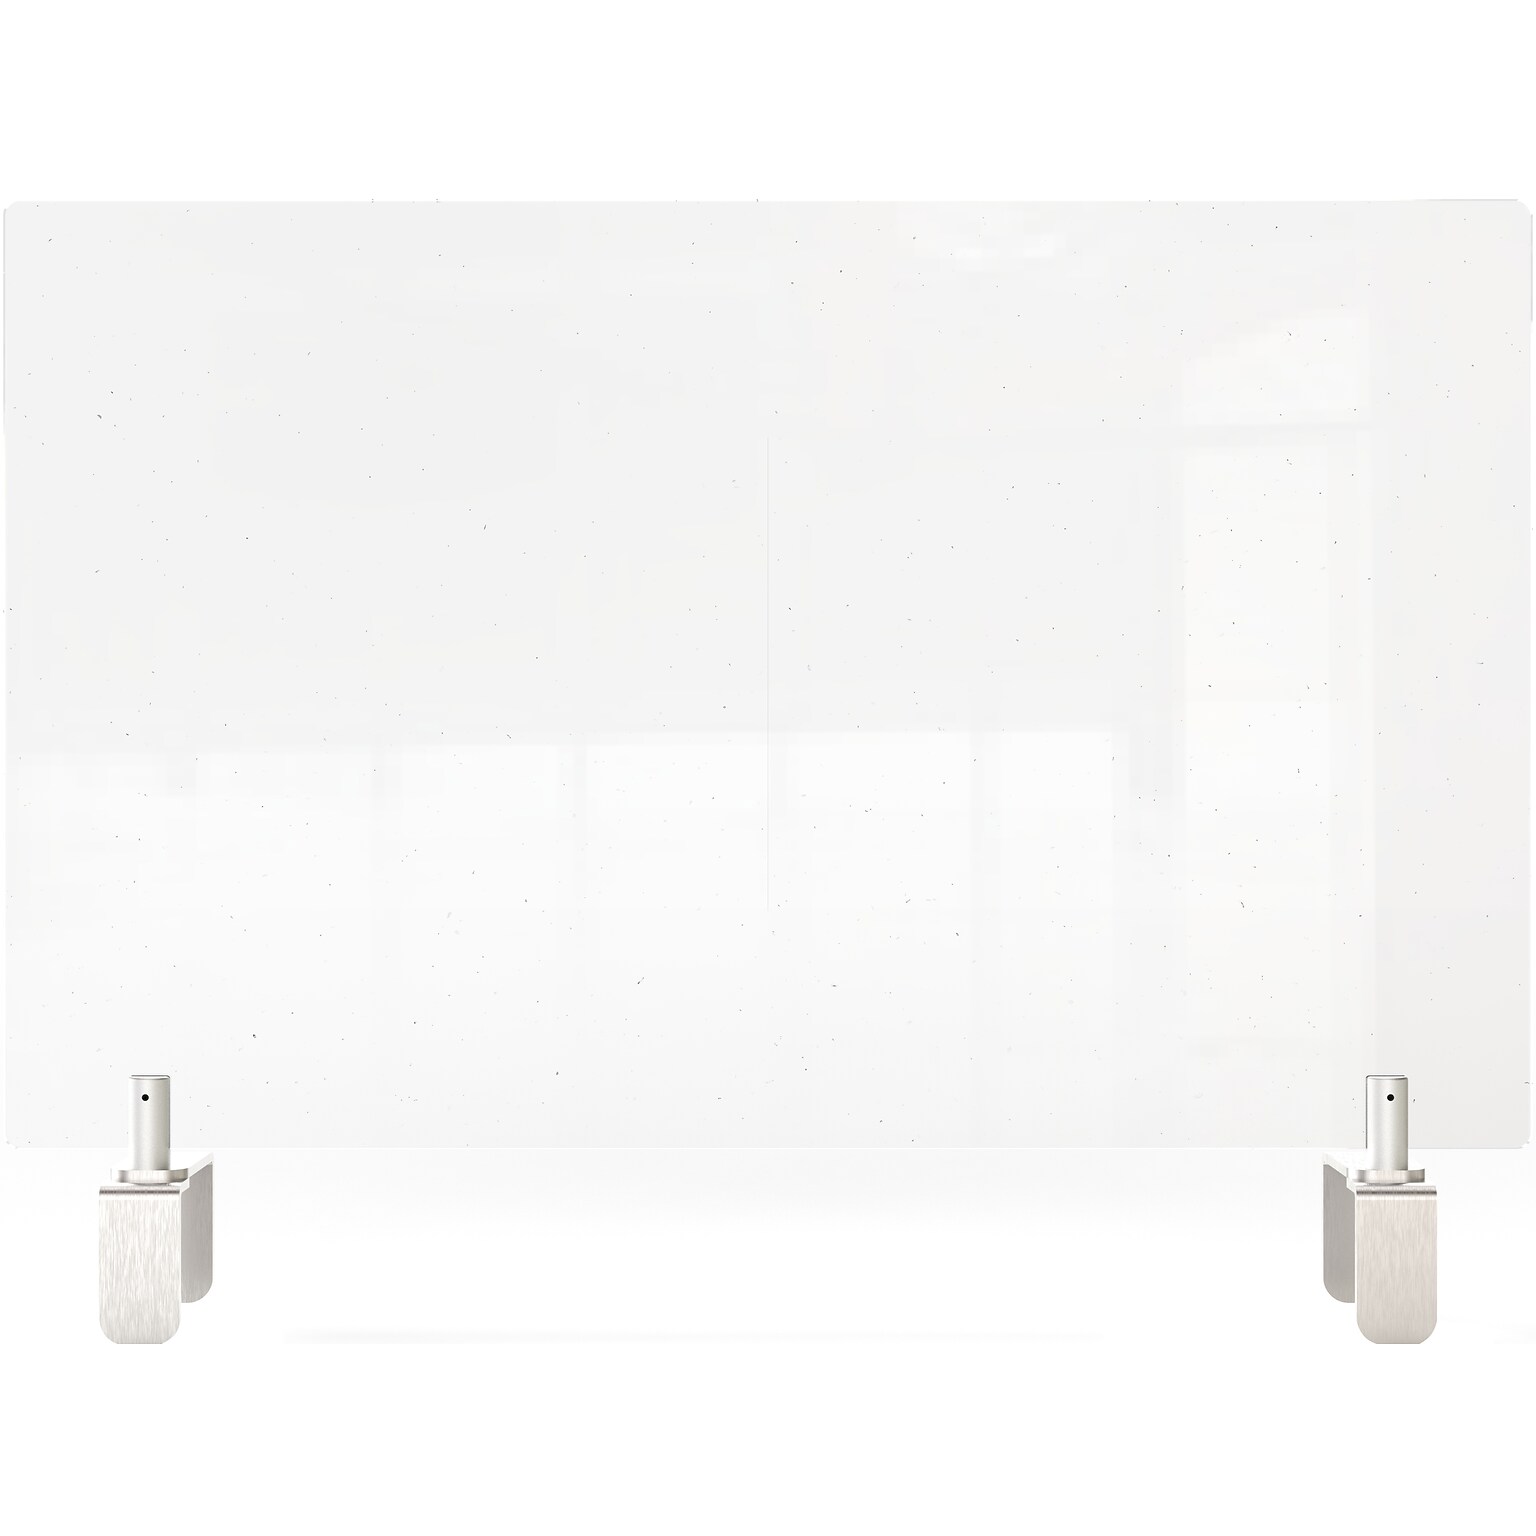 Ghent Clamp 18 x 36 Acrylic Non-Tackable Panel Extender, Clear (PEC1836-A)